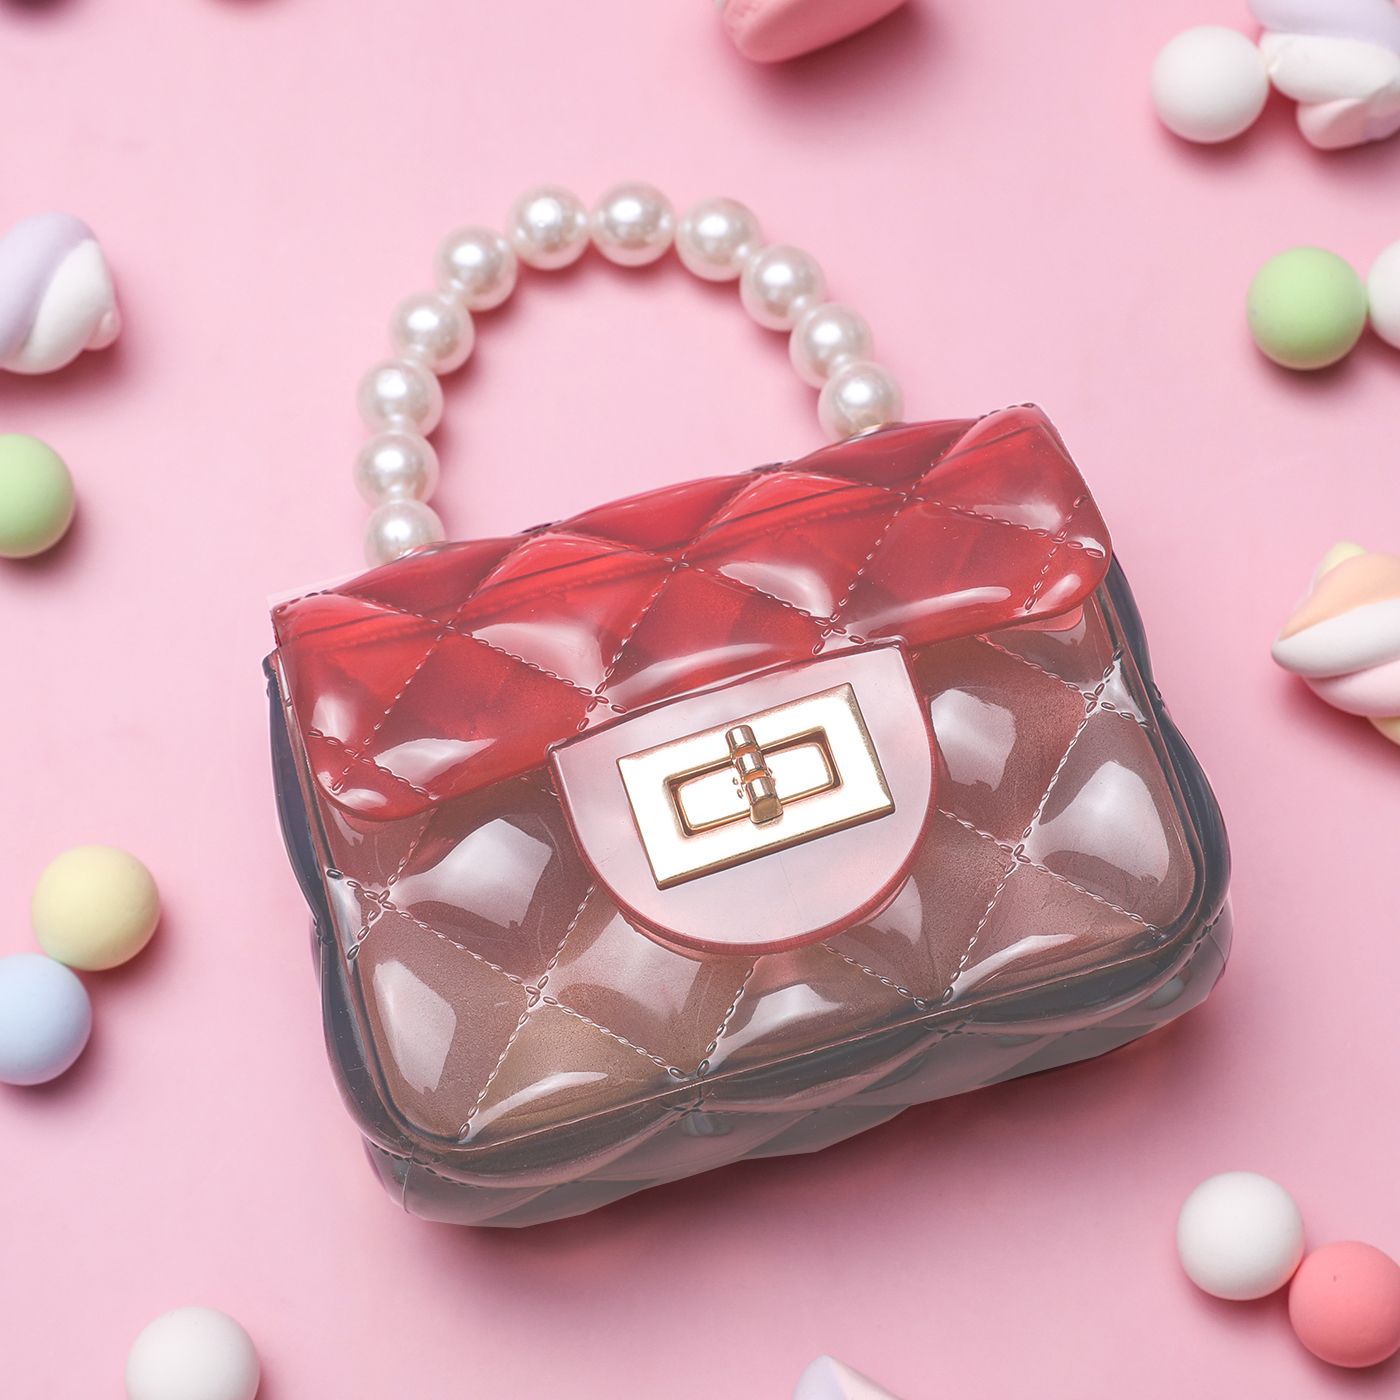 A Cute Transparent Jelly Bag Suitable For Girls, Both Portable And Diagonal